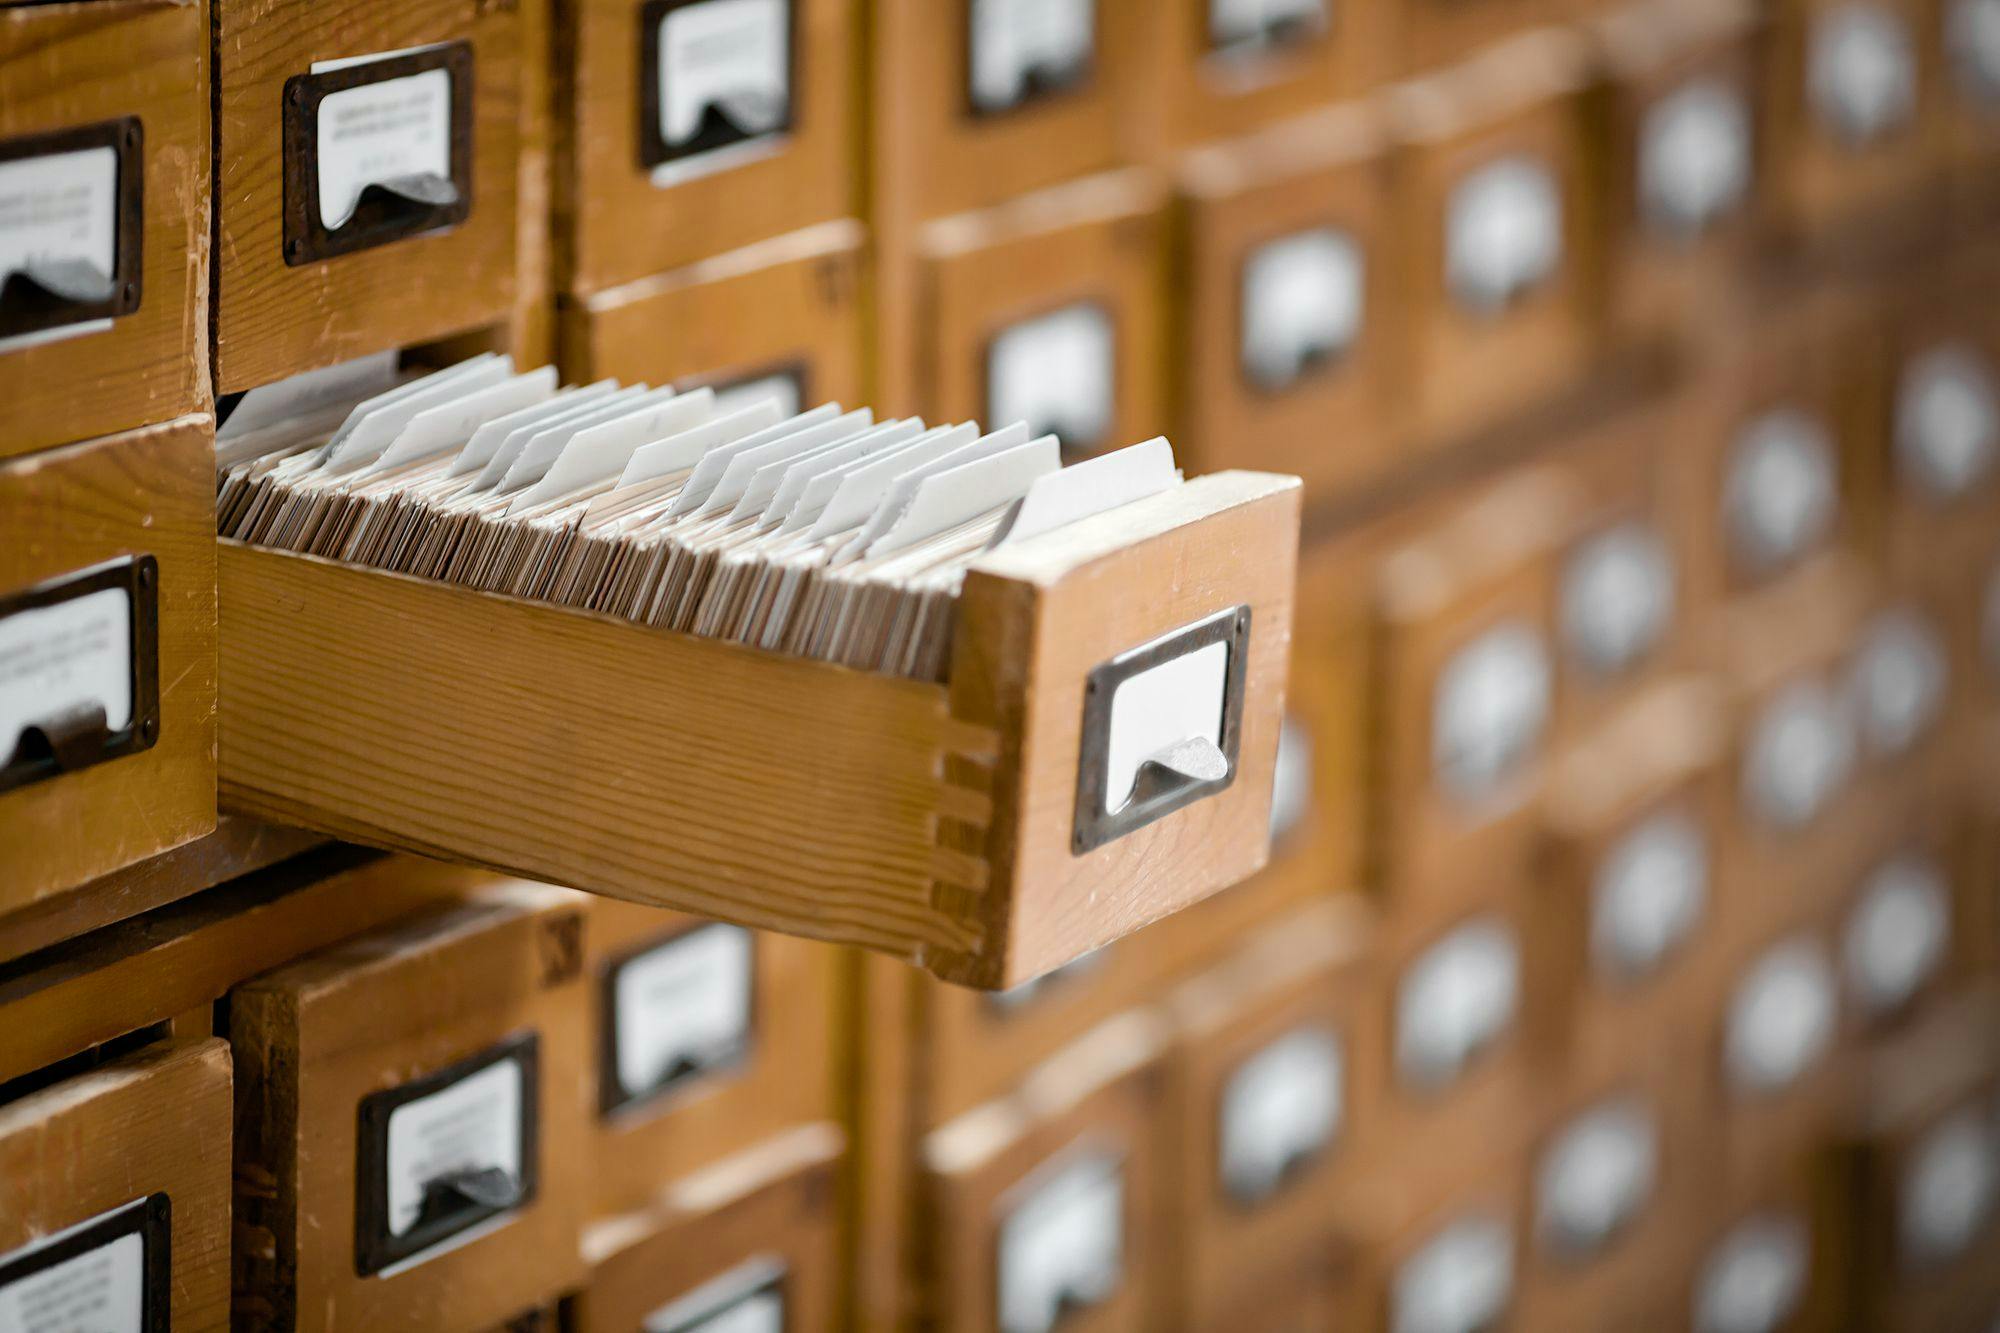 An open drawer in a card file